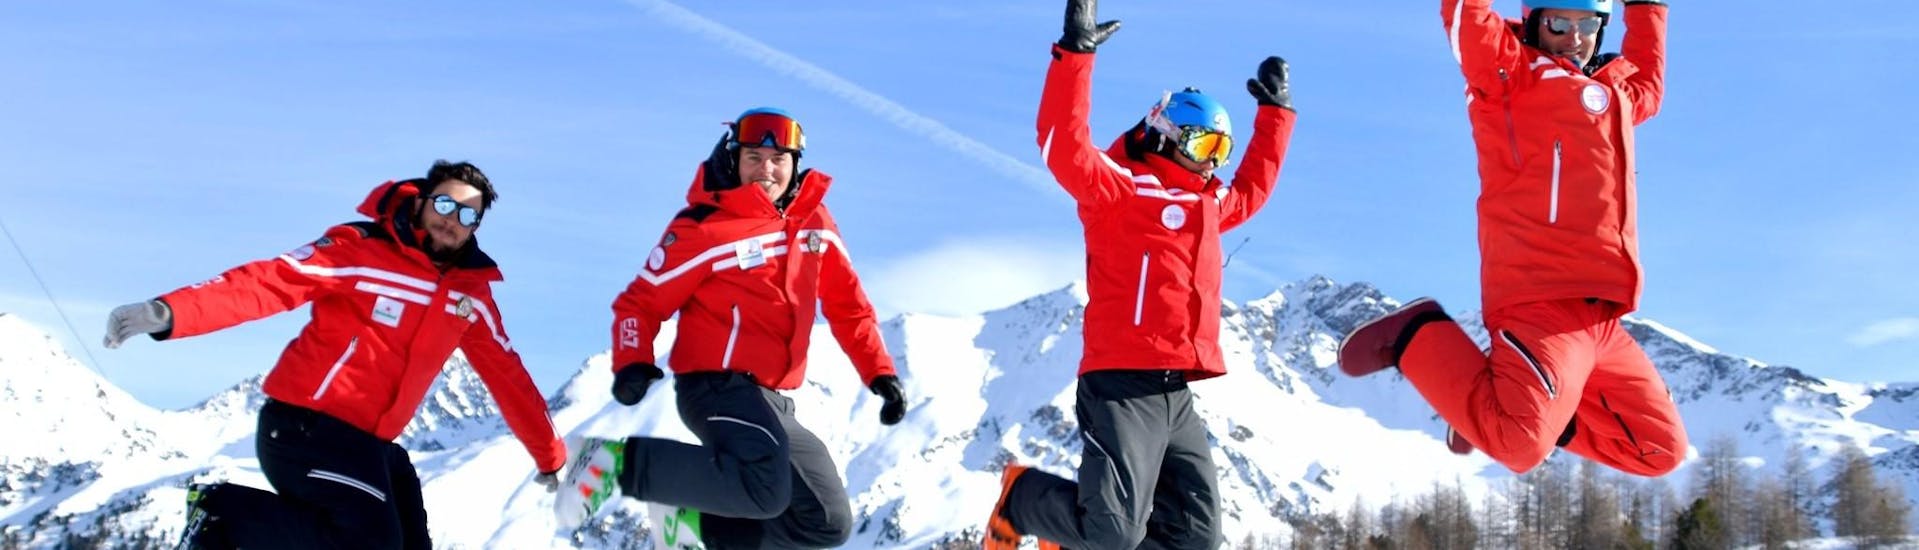 Some instructors from Scuola di Sci Pila jumping on a slope in front of the camera.